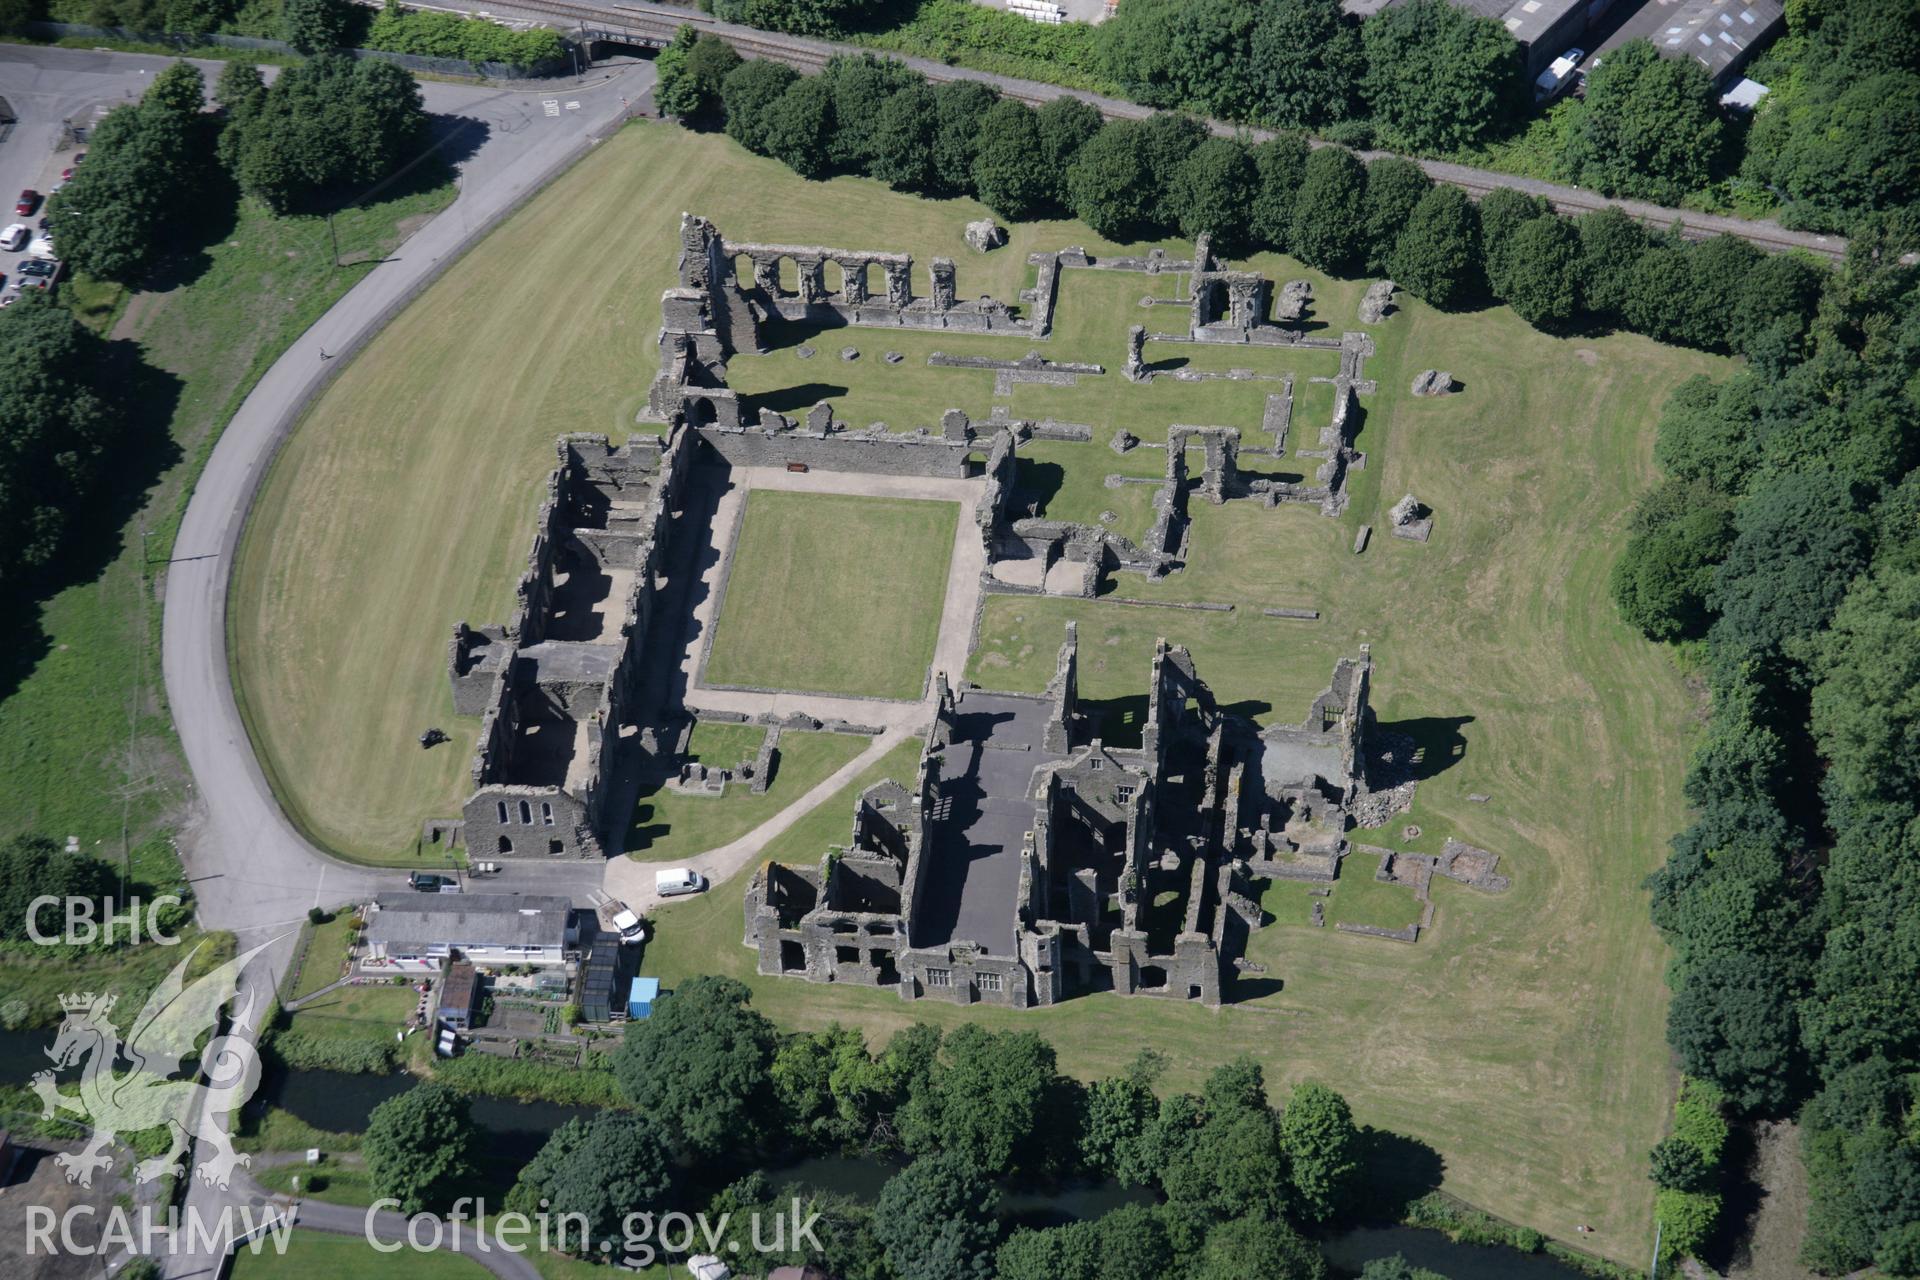 RCAHMW colour oblique aerial photograph of Neath Abbey, viewed from the south. Taken on 22 June 2005 by Toby Driver